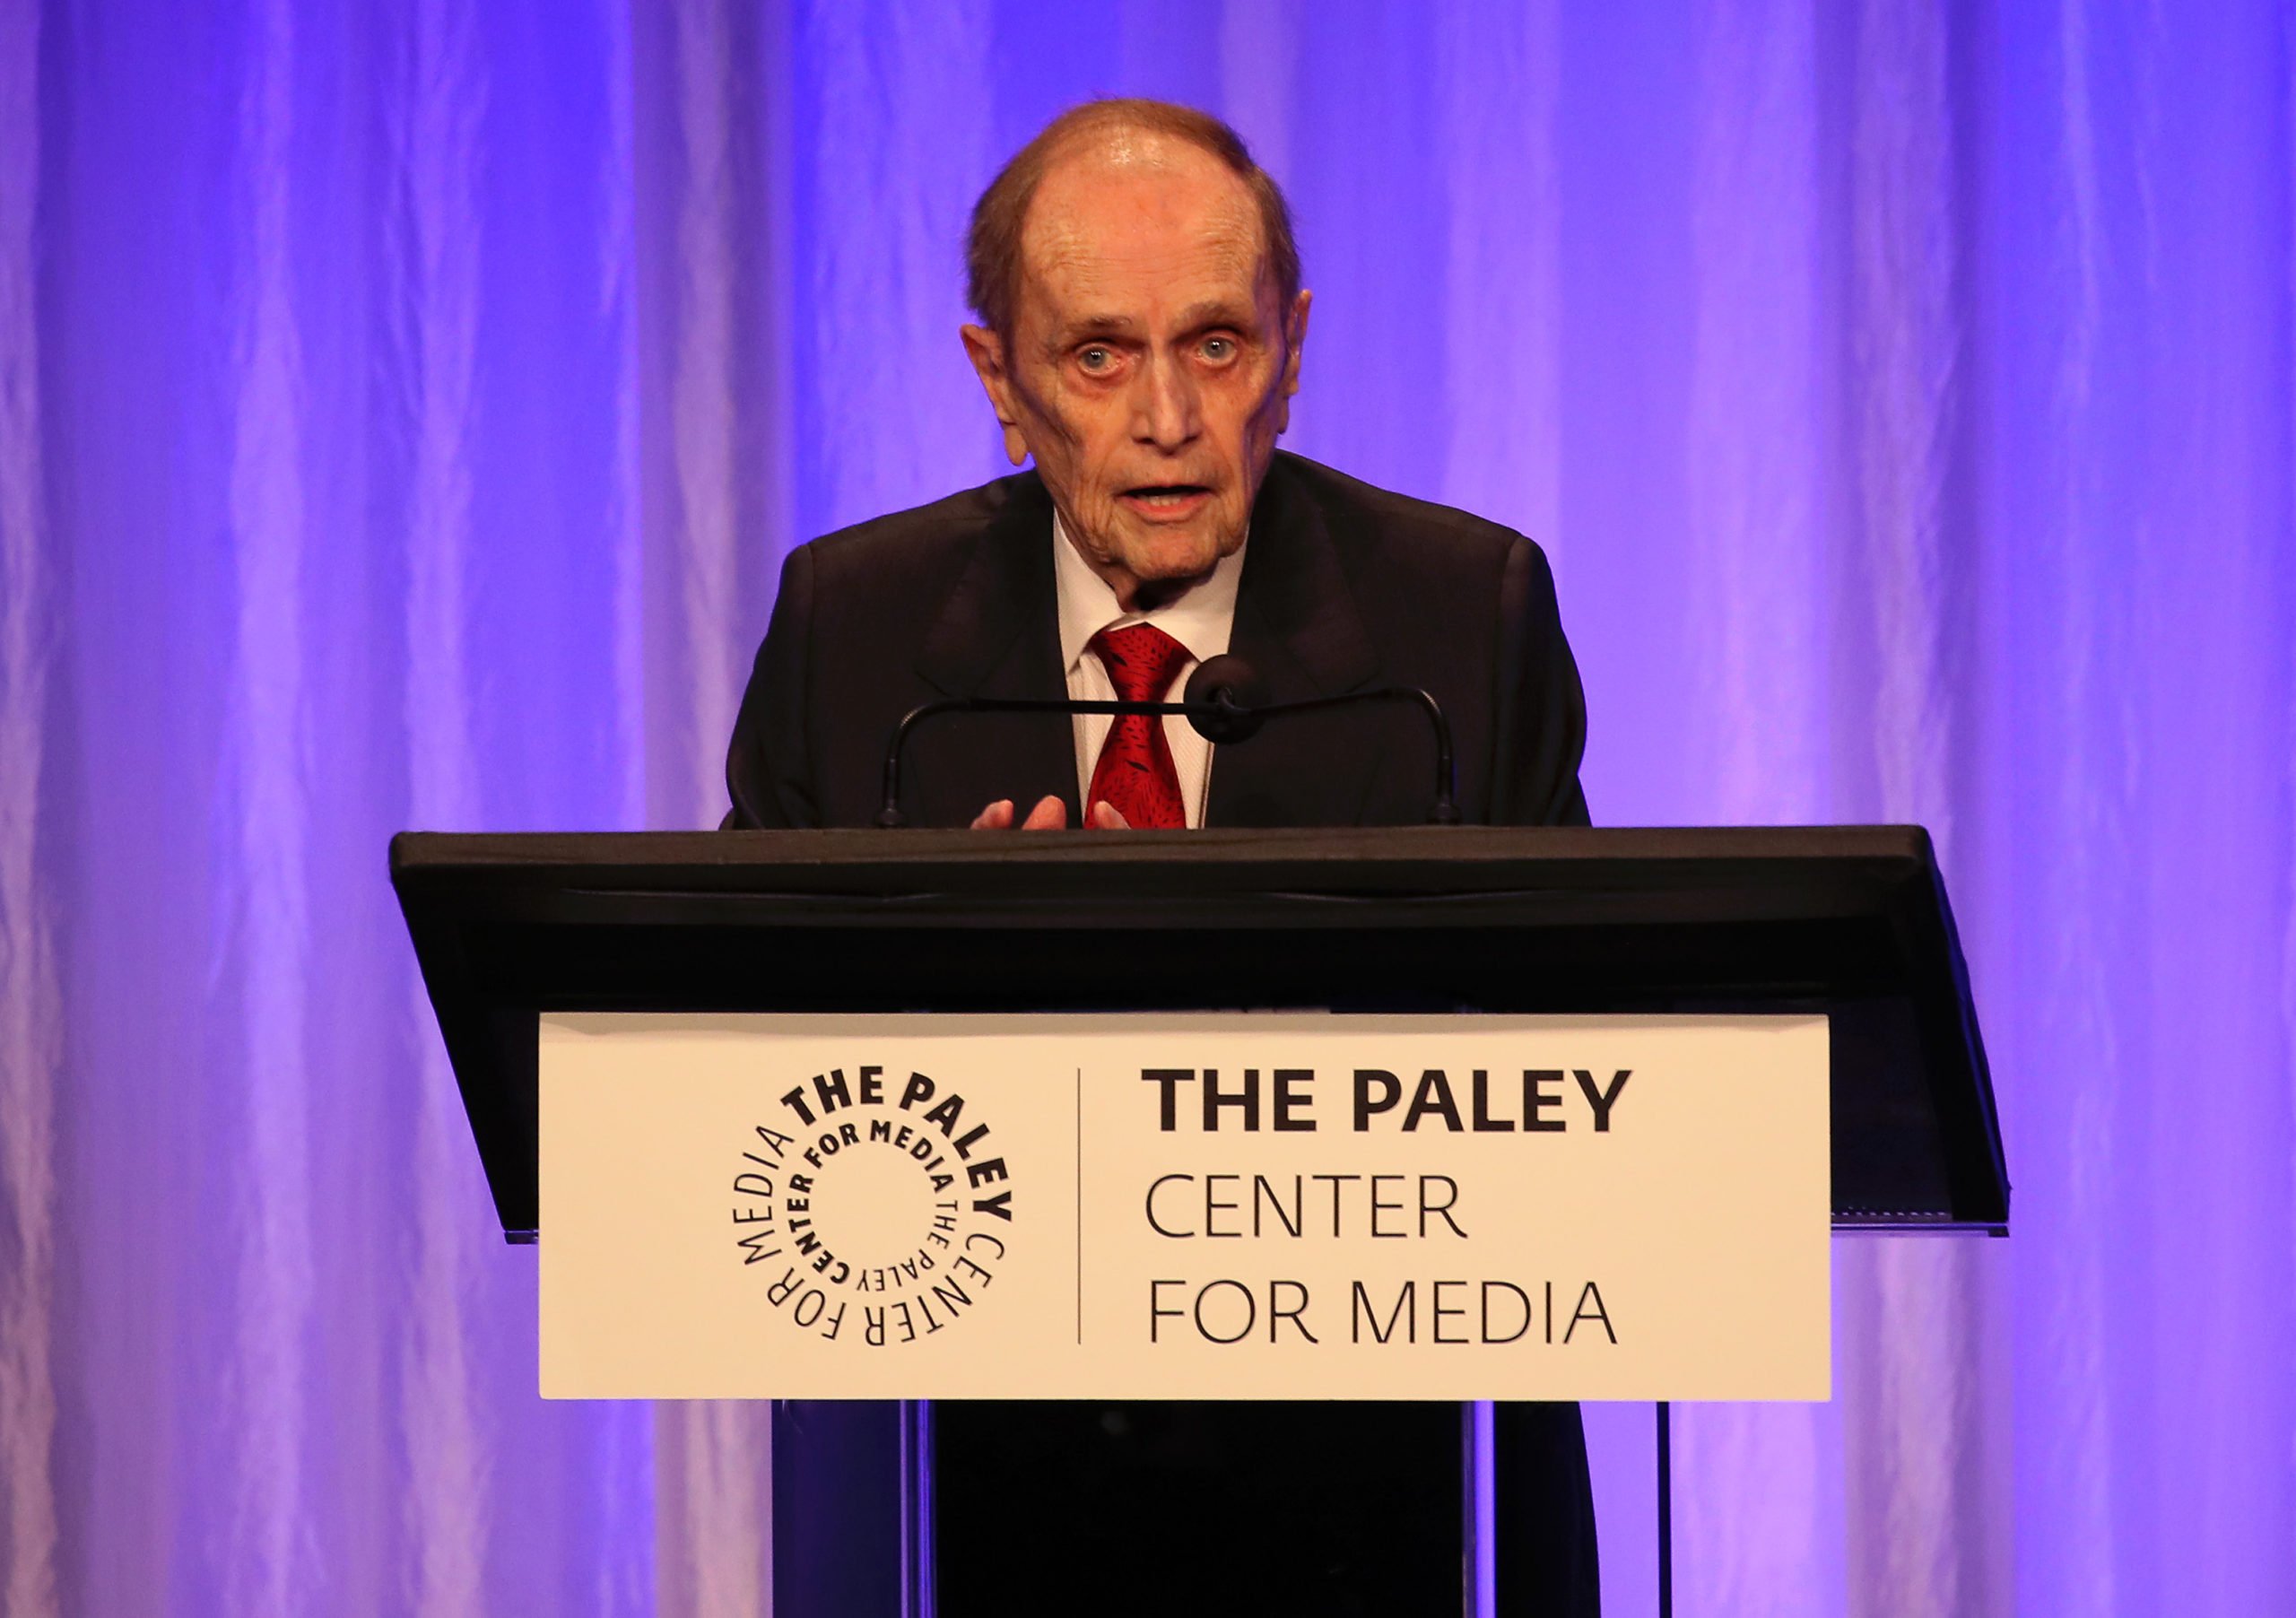 BEVERLY HILLS, CALIFORNIA - NOVEMBER 21: Bob Newhart appears on stage at The Paley Honors: A Special Tribute To Television's Comedy Legends at the Beverly Wilshire Four Seasons Hotel on November 21, 2019 in Beverly Hills, California. (Photo by David Livingston/Getty Images)